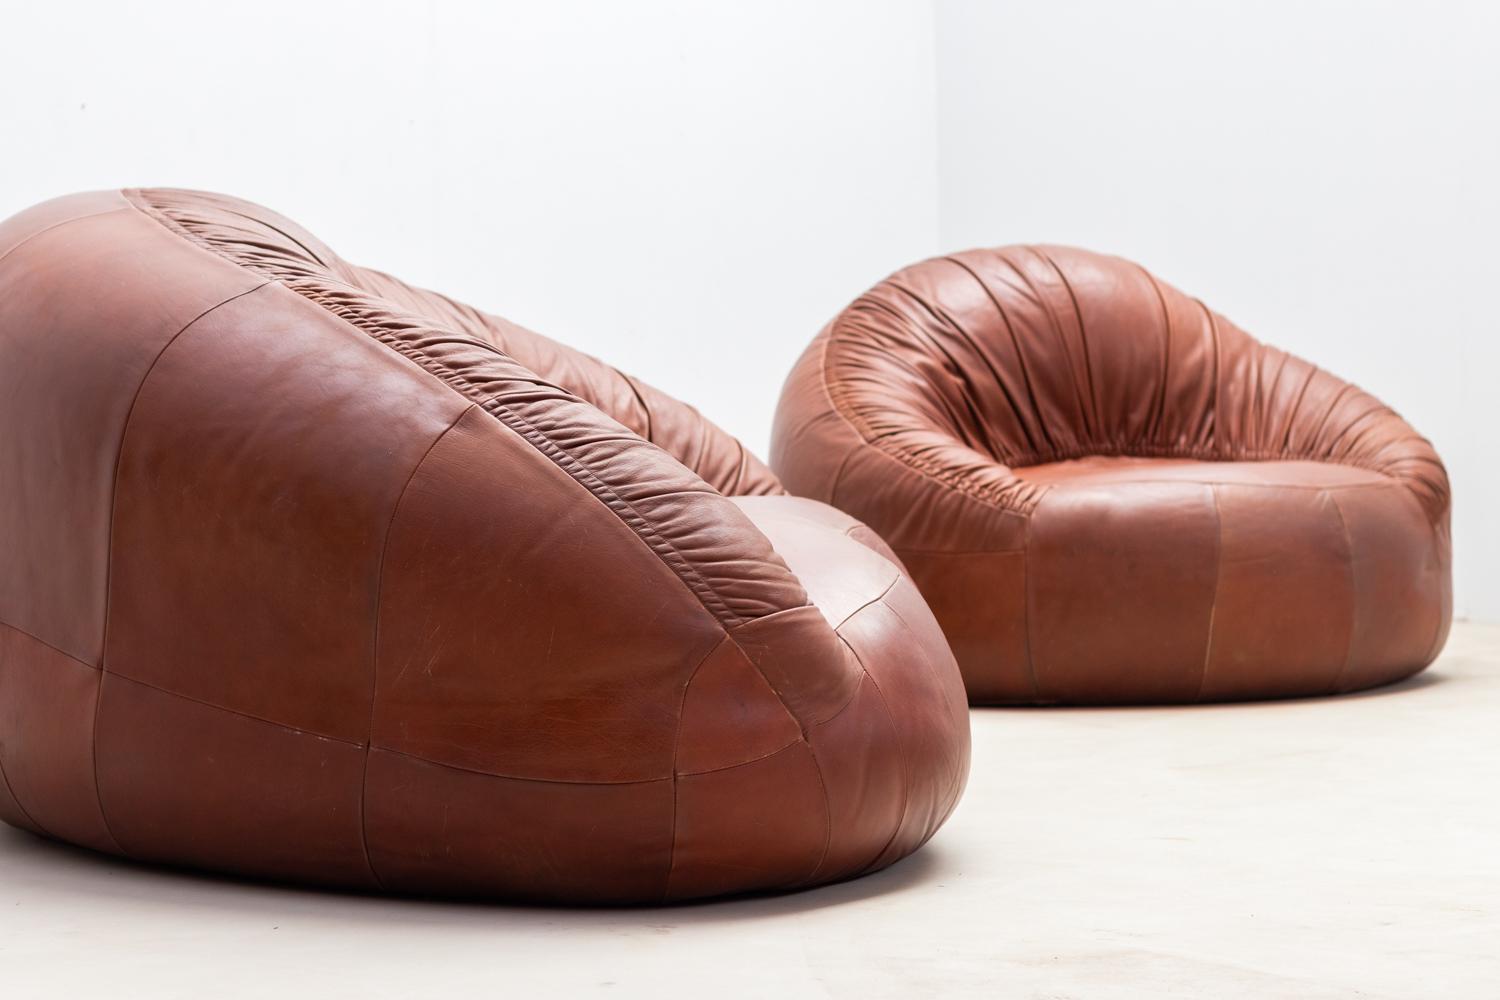 Contemporary Pangolin Leather sofa and armchair by Egg Designs For Sale